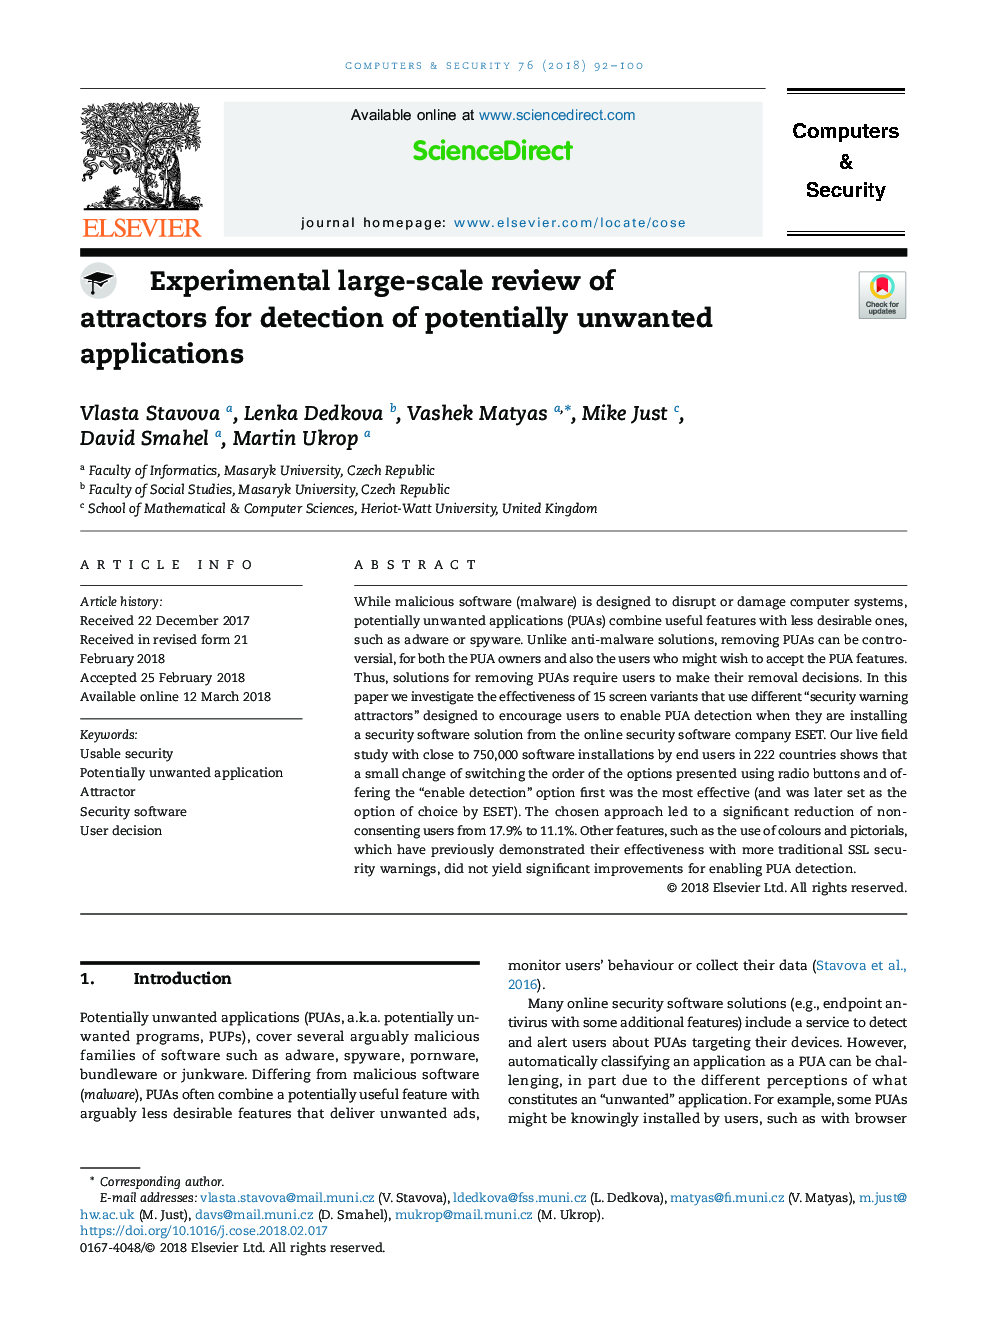 Experimental large-scale review of attractors for detection of potentially unwanted applications